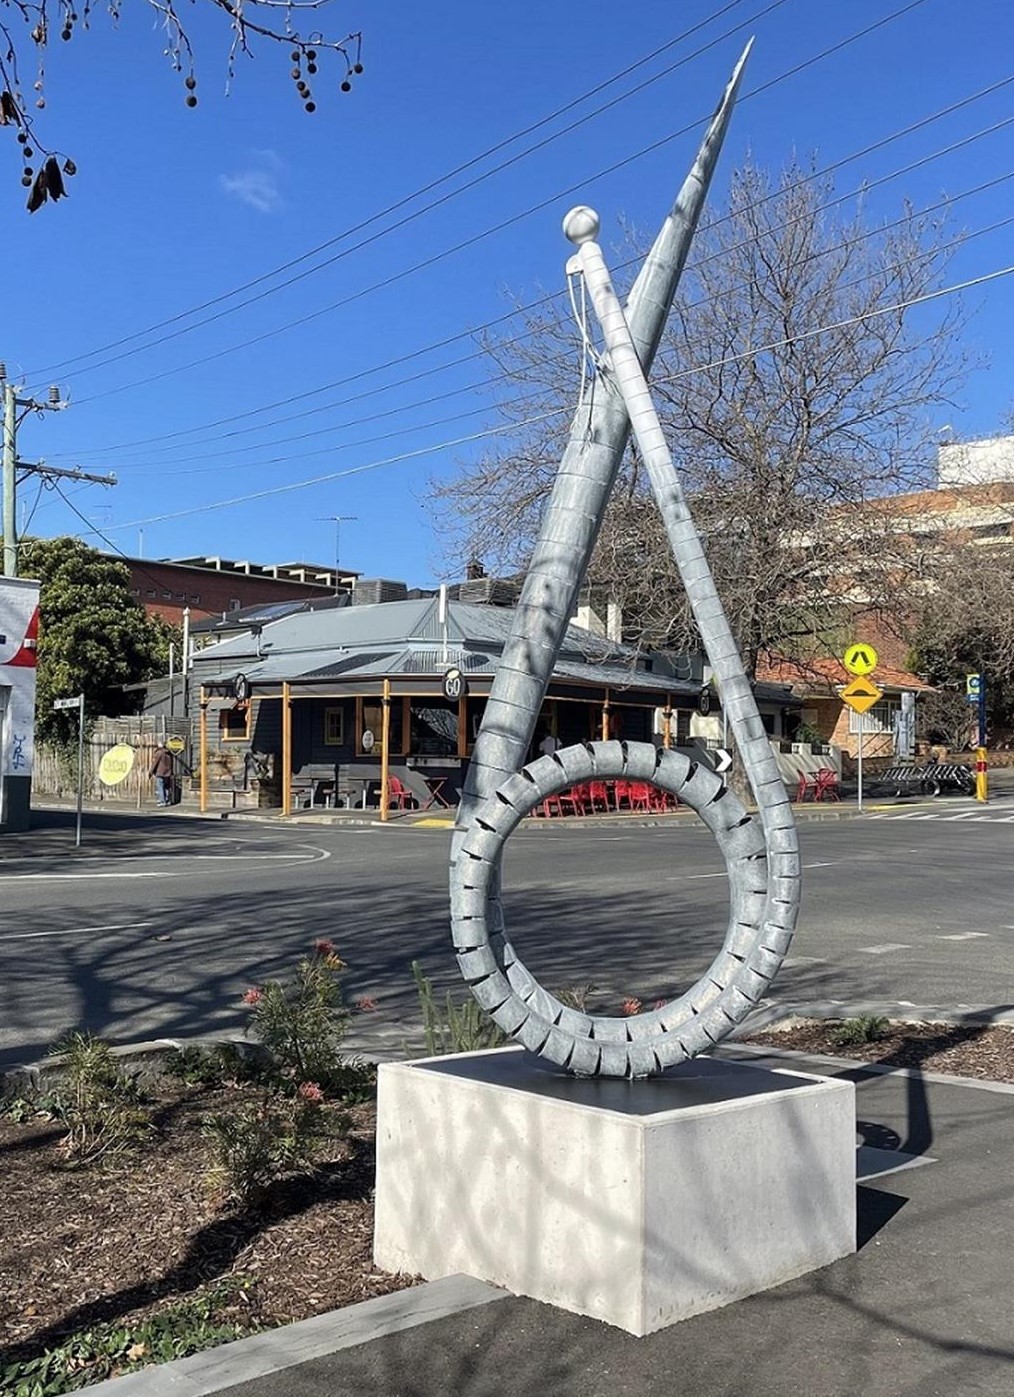 A large sculpture, metalic and coiled stands upright on a concrete platform along the art installation along the Bellerine Street